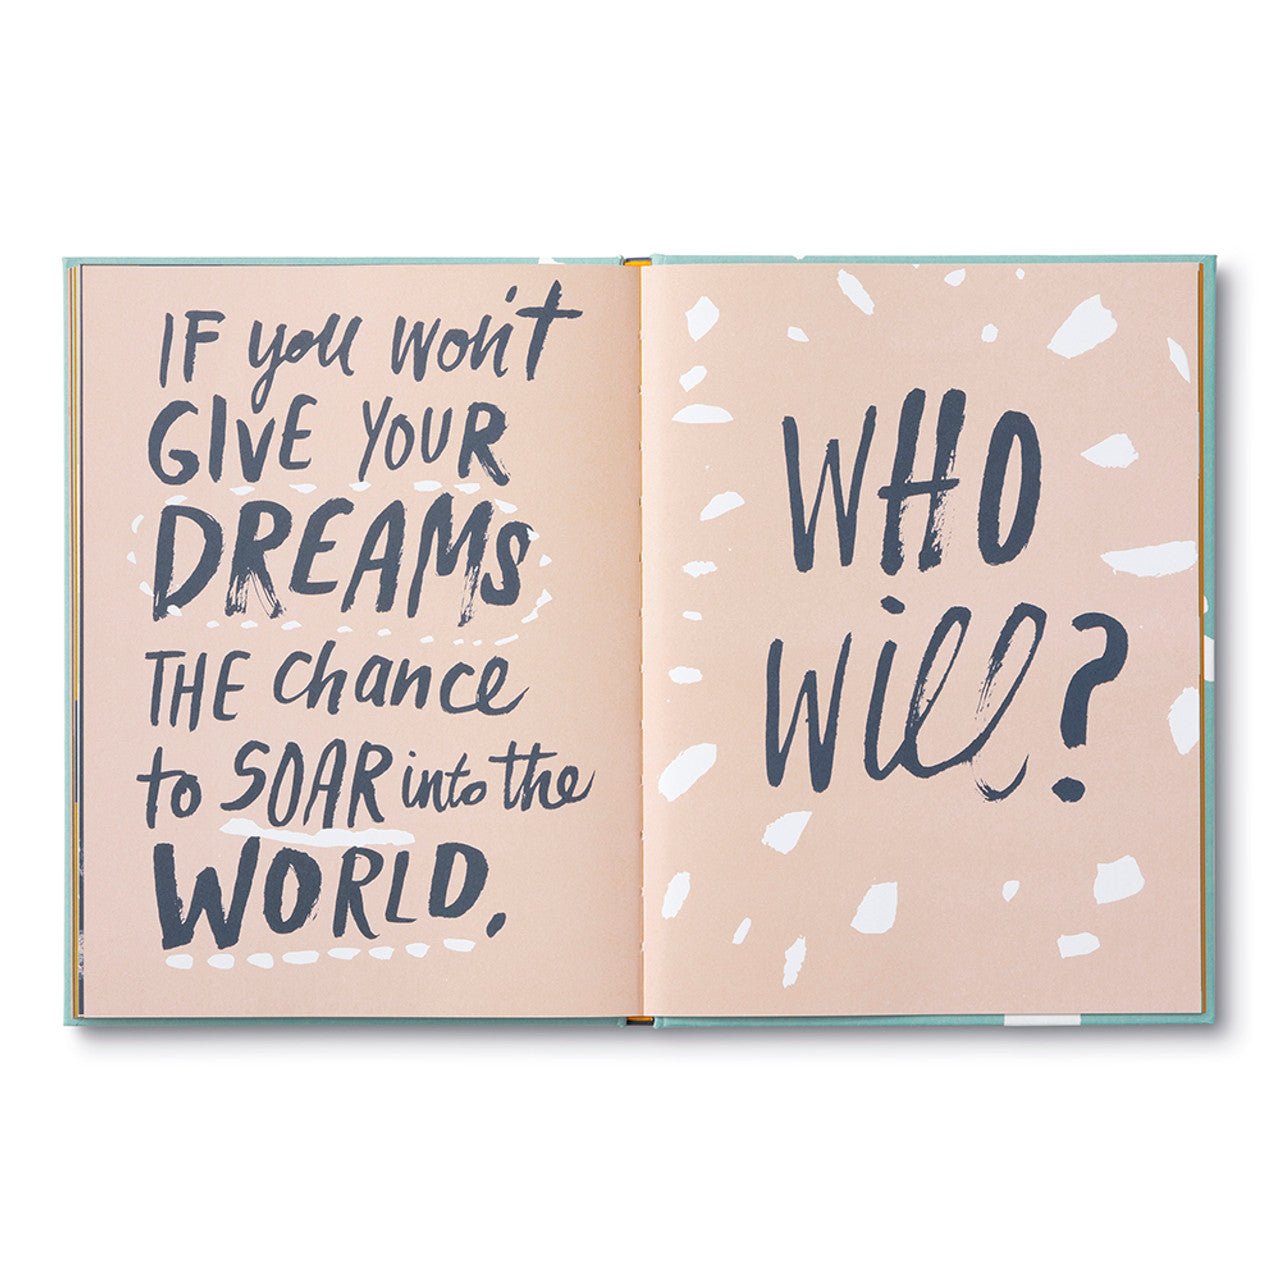 Now Is The Time for Dreams Gift Book - The Kindness Cause